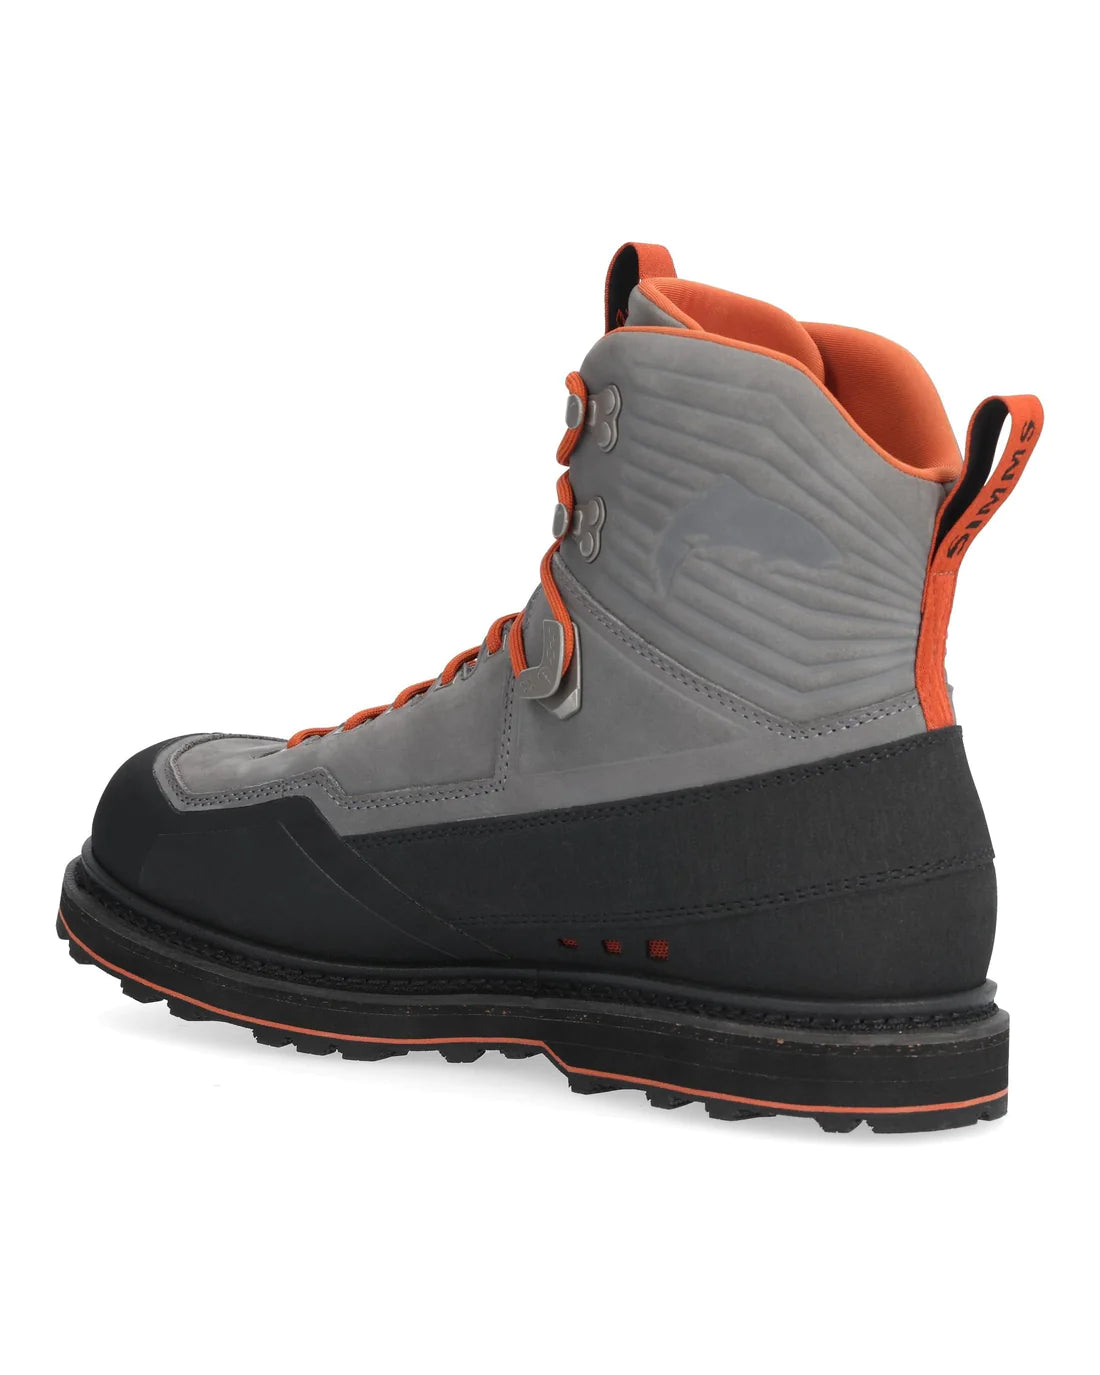 M's G3 Guide Wading Boots - Vibram Sole